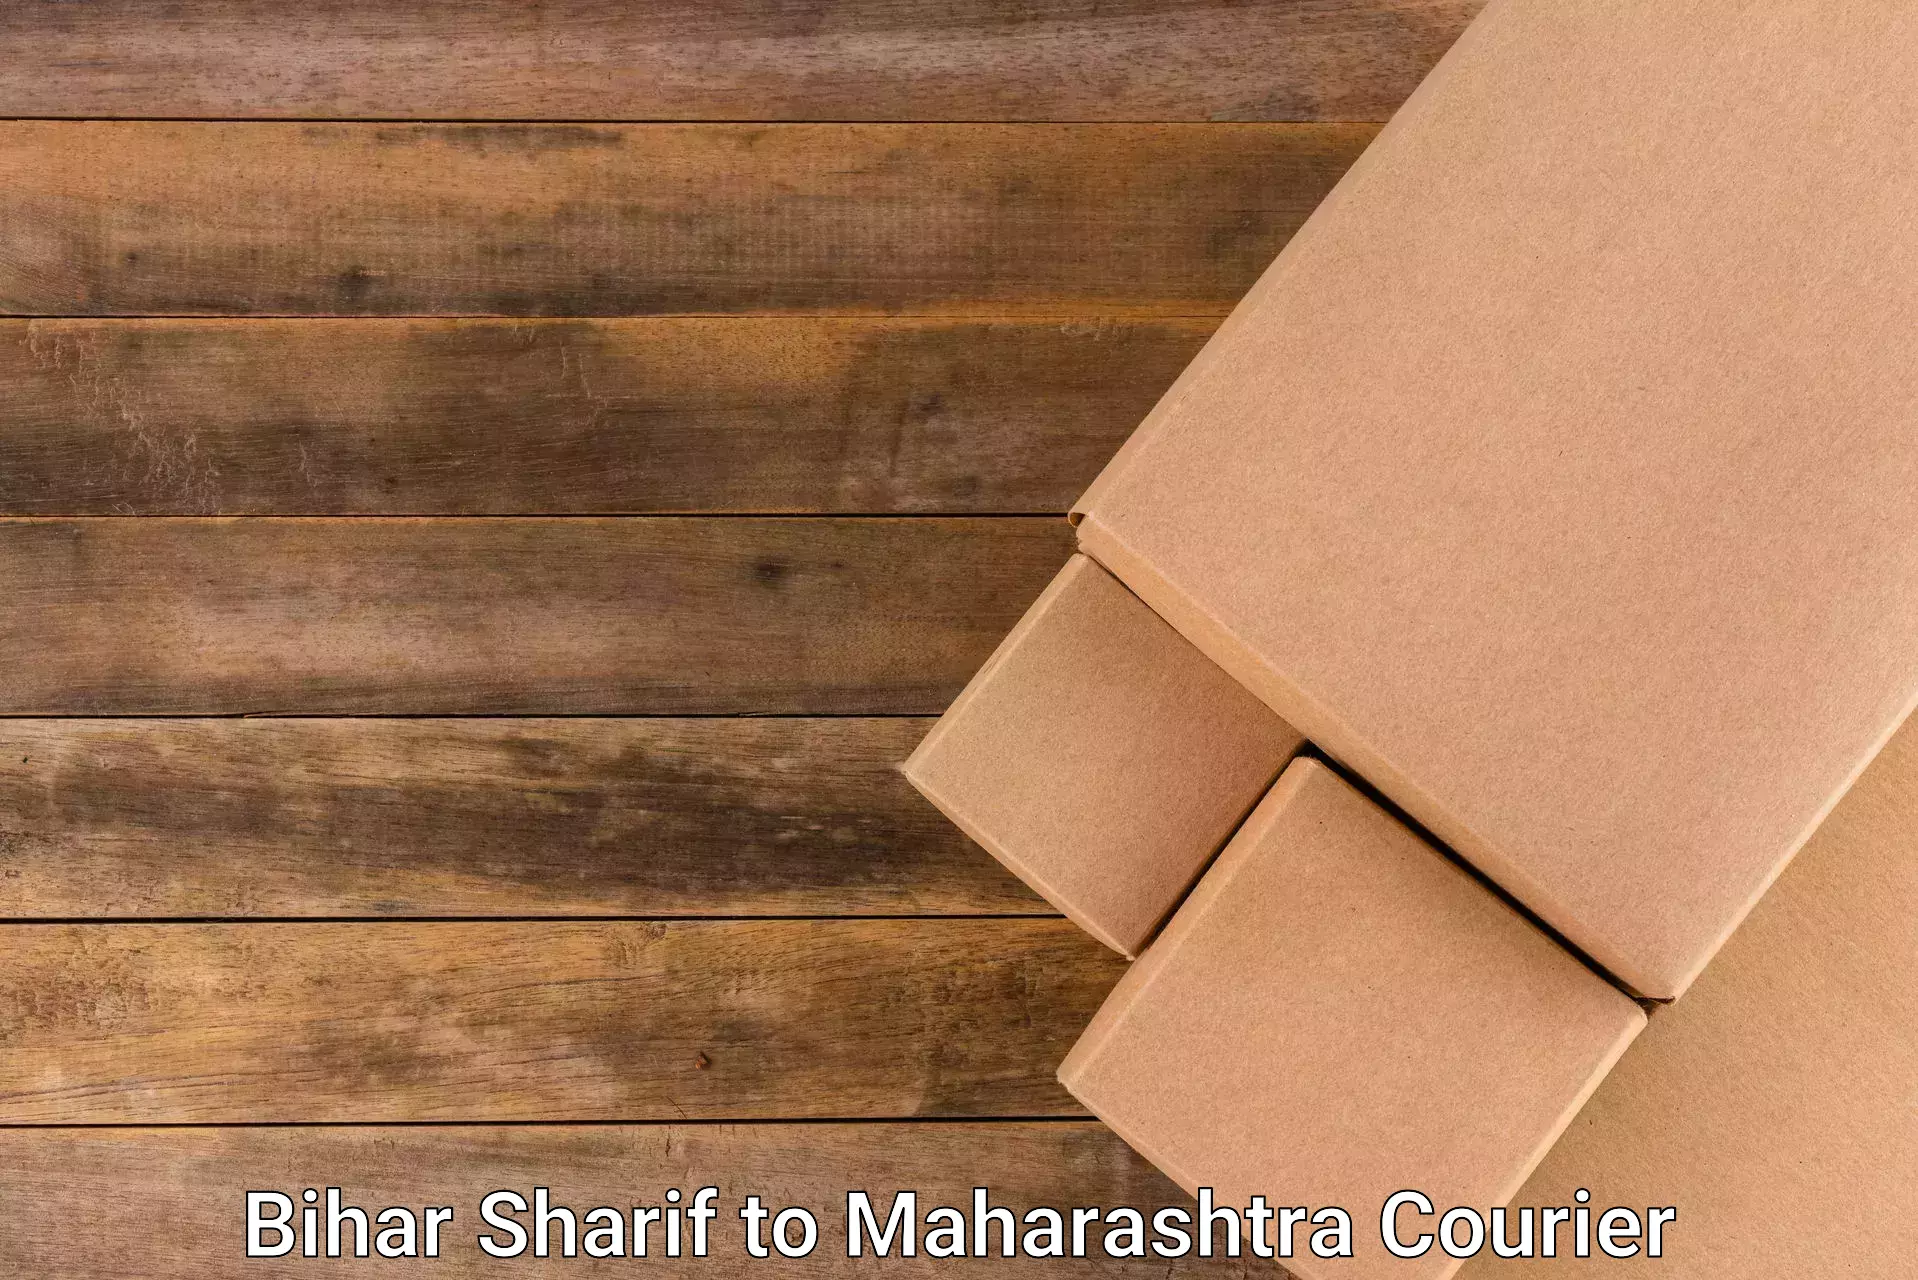 Express delivery solutions Bihar Sharif to Karjat